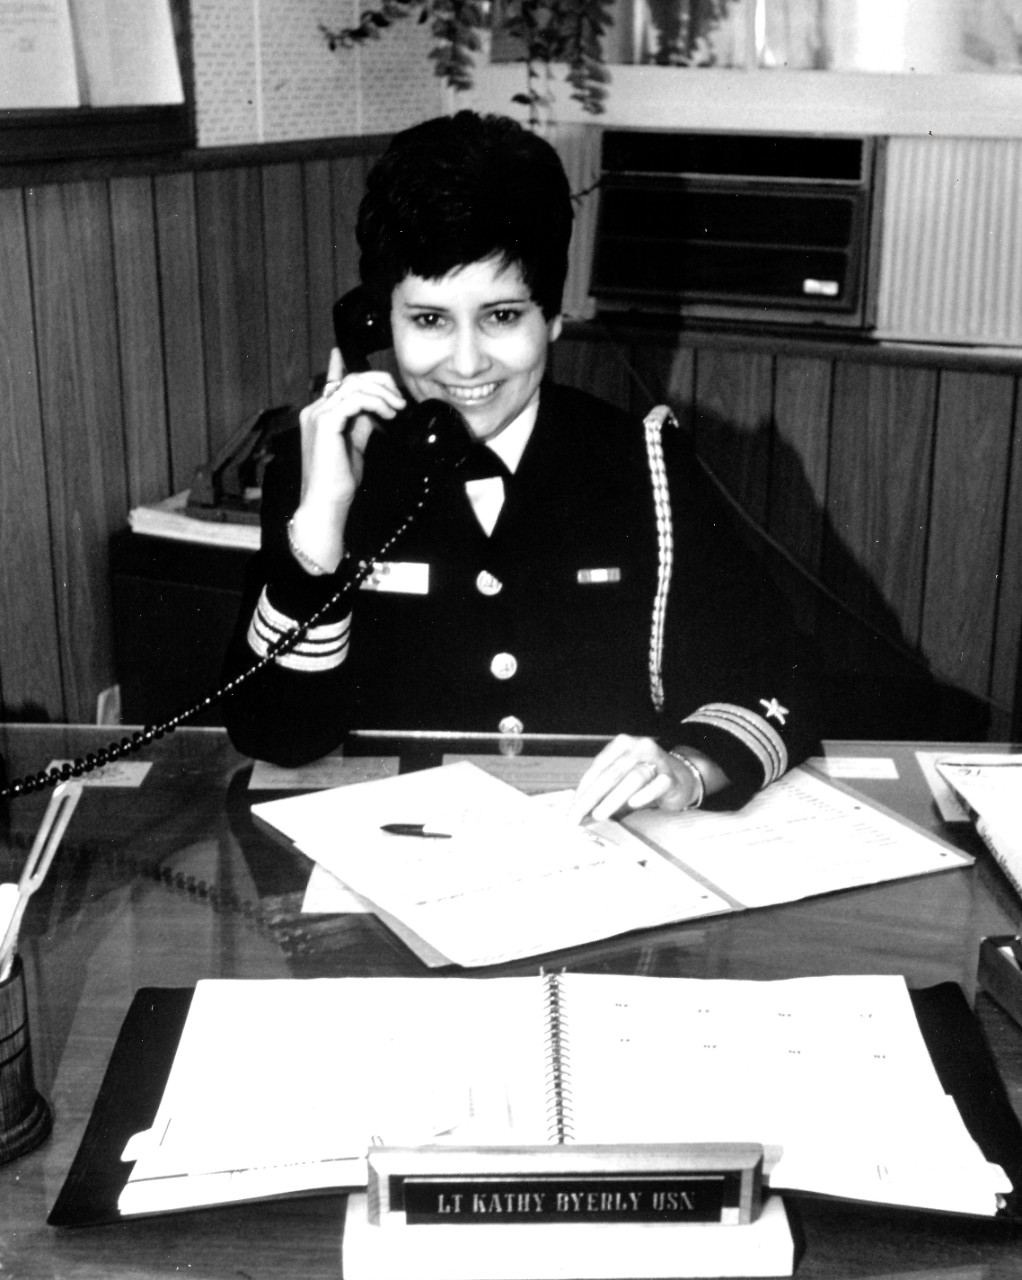 K-312754:   Lieutenant Kathleen M. Byerly, February 1976.    Byerly, Flag Secretary and Aide to Rear Admiral Allen E. Hill, Commander, Training Command, Pacific, talks on the telephone in her office at the Fleet Training Center.  She was chosen by “Time” Magazine as one of their twelve “Women of the Year” for 1975.    Photographed by Lieutenant Byerly, February 12, 1976.  Official U.S. Navy Photograph, now in the collections of the National Archives.  Black and white only. 